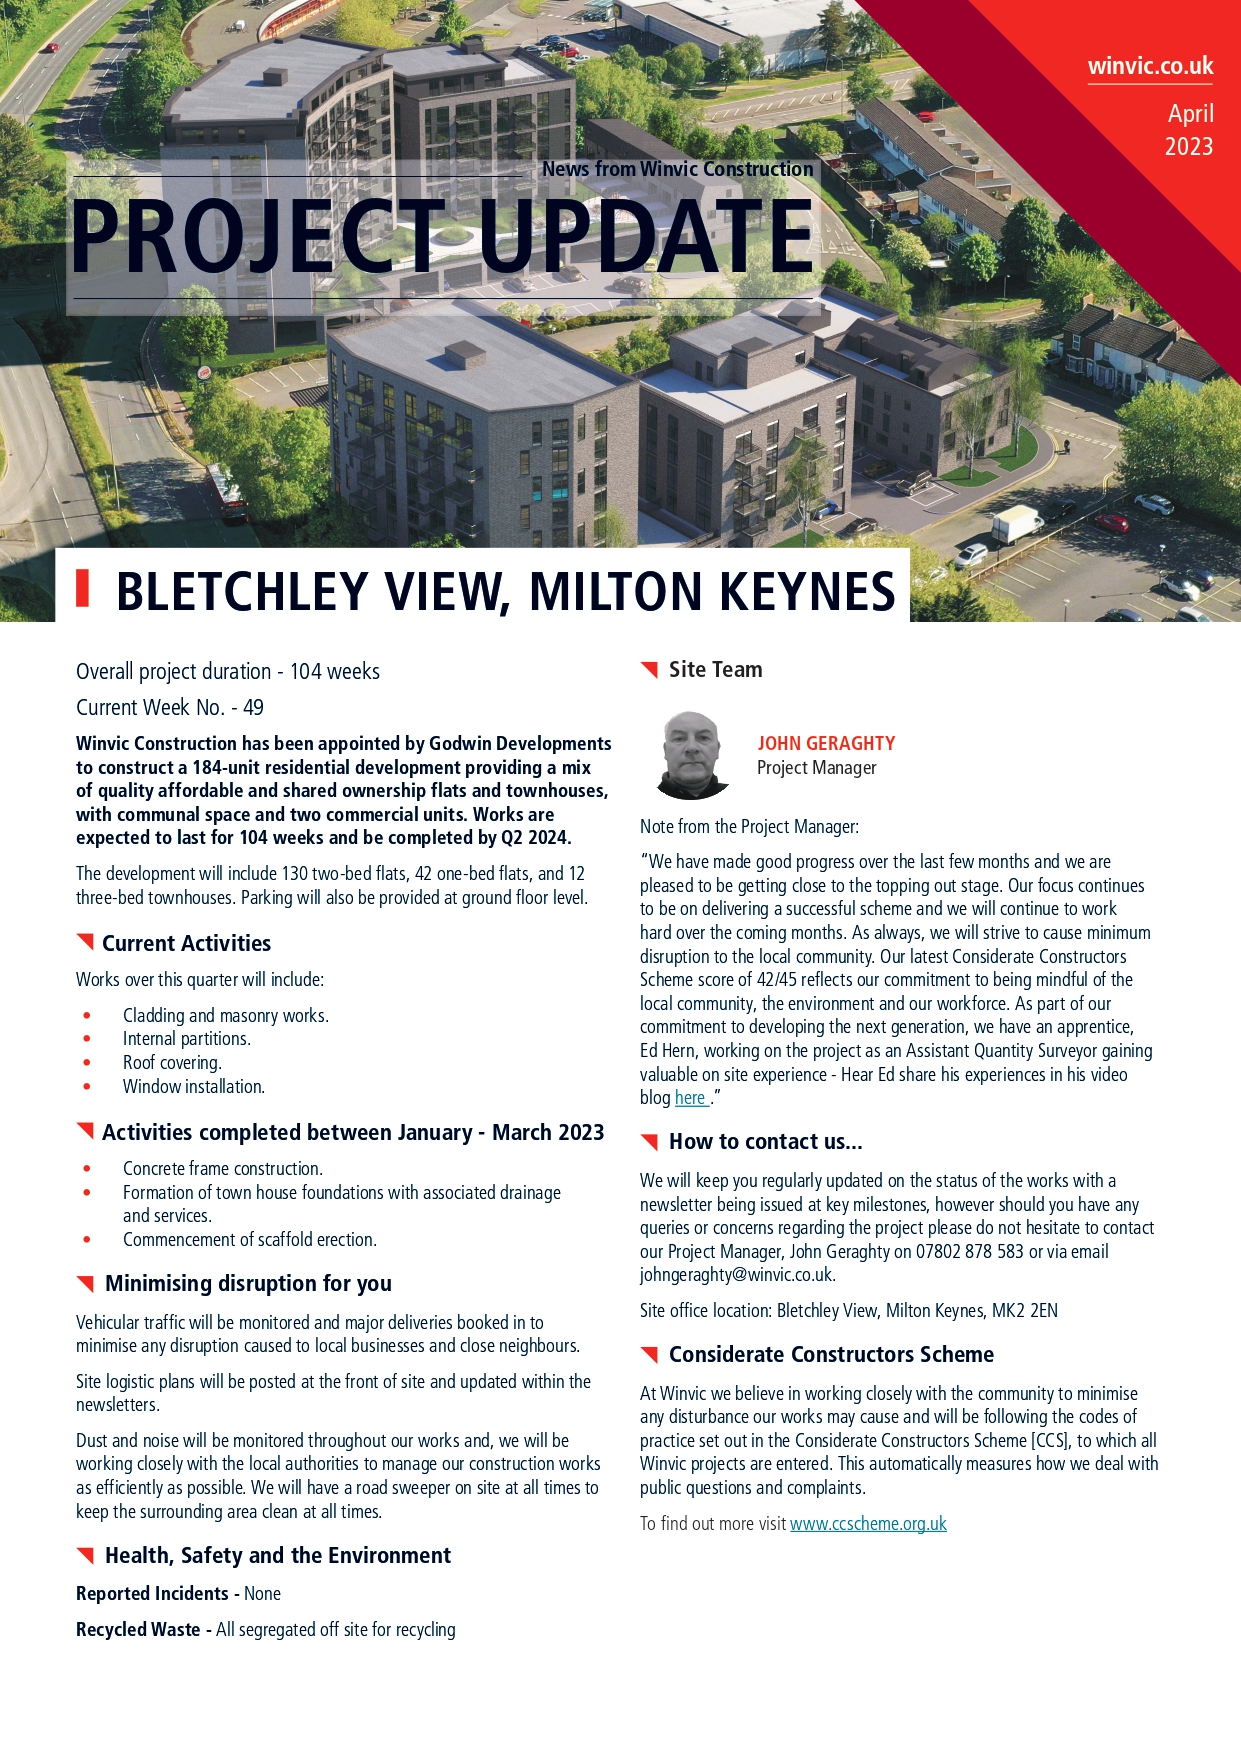 Image of front page of project update newsletter on Bletchley View